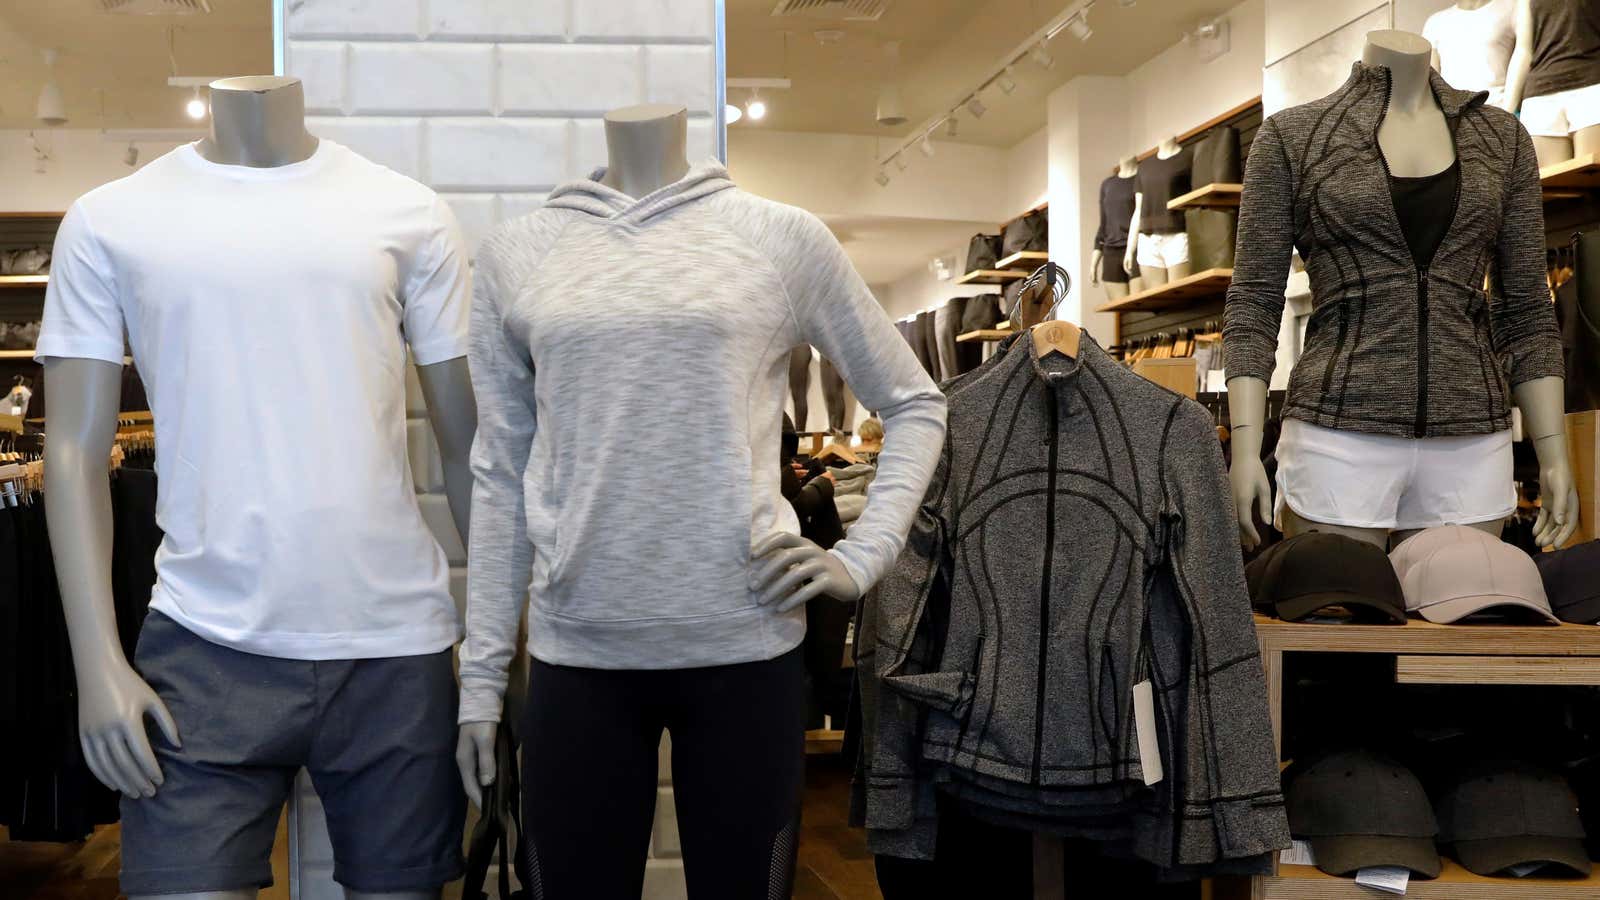 Lululemon's yoga pants keep selling, even for at-home workouts